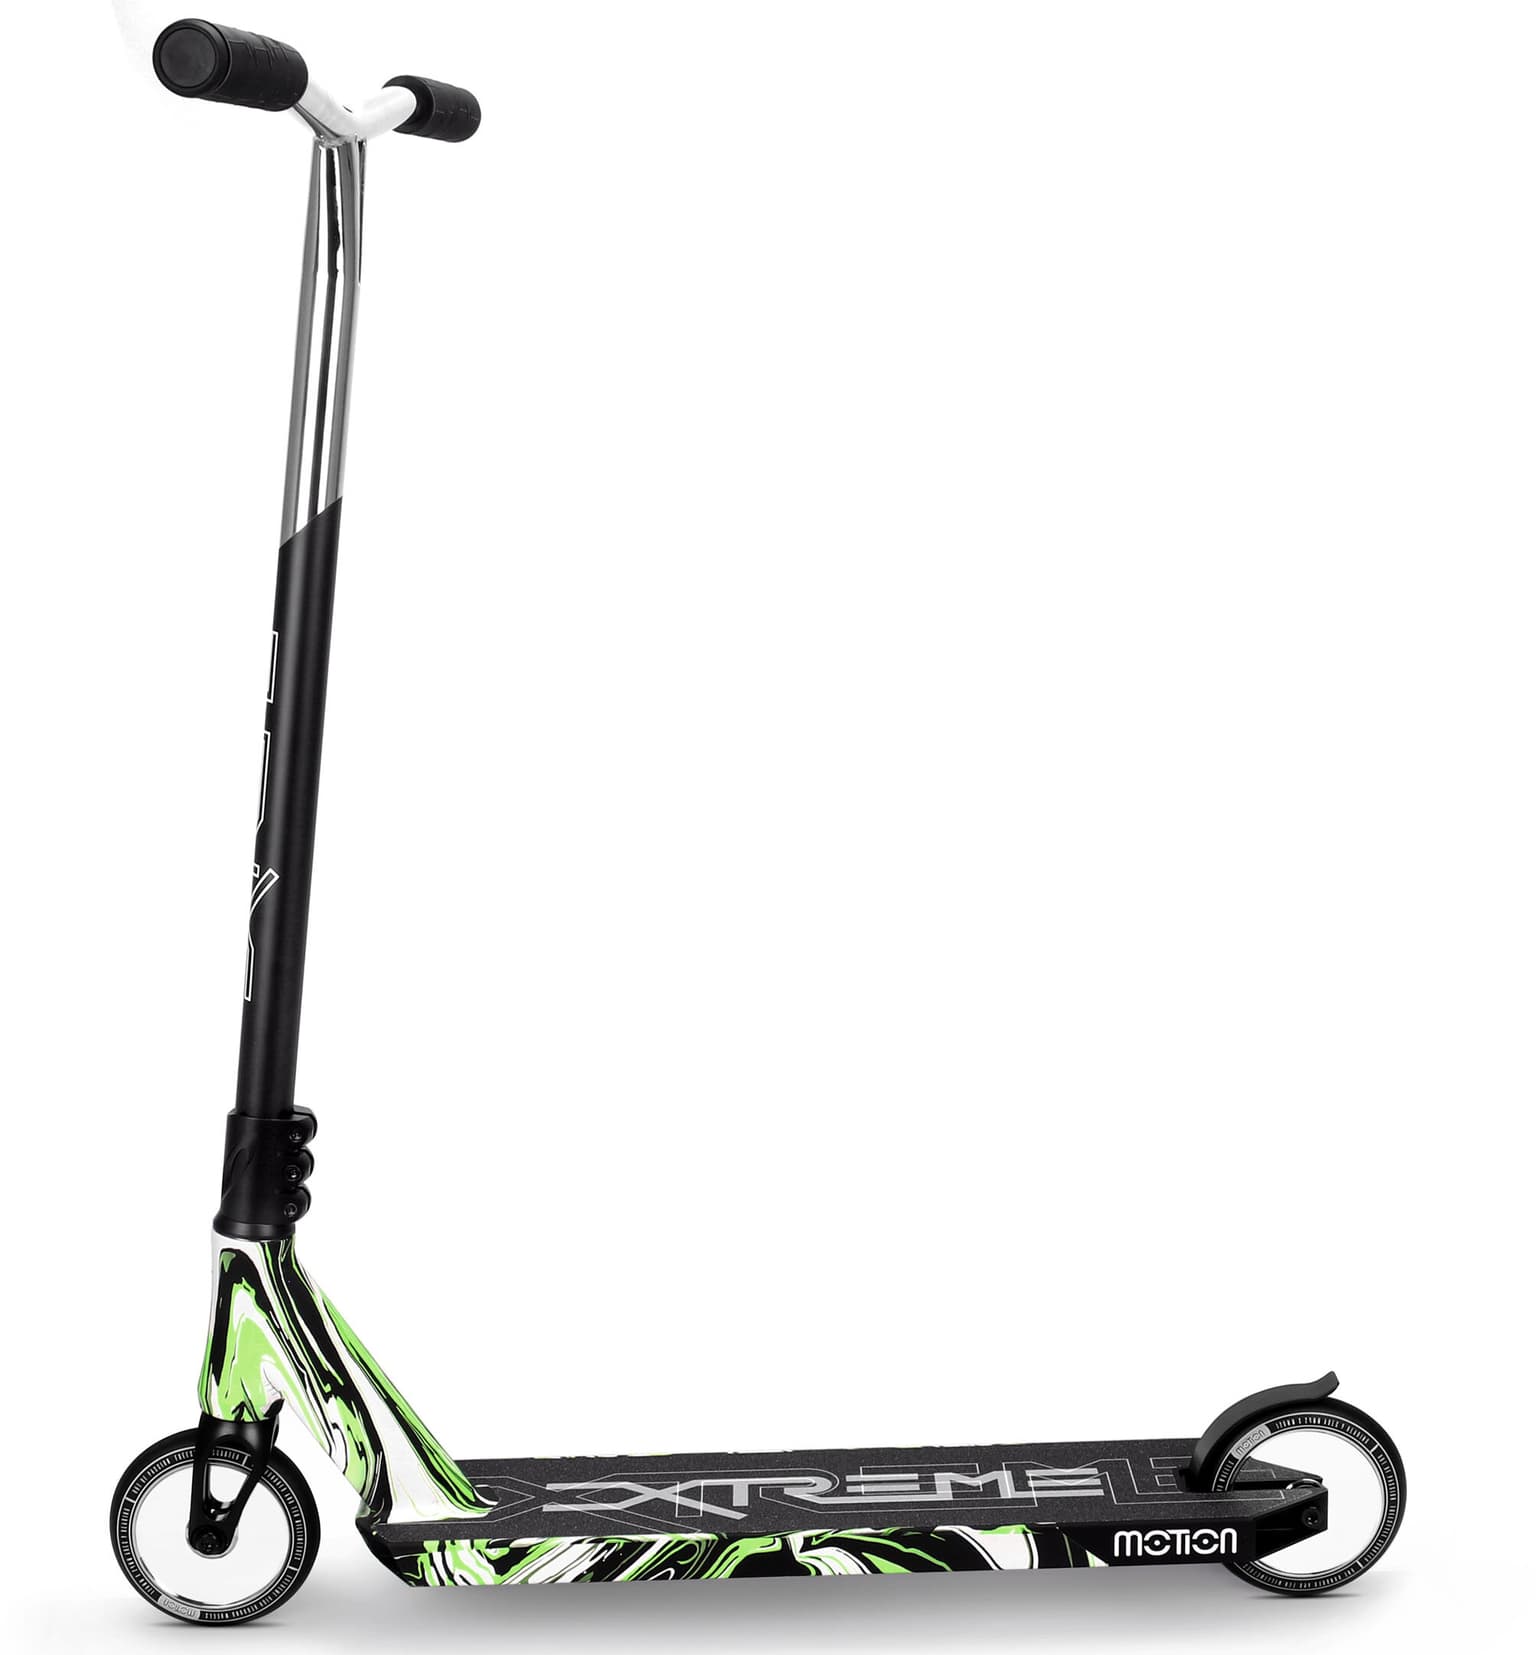 Motion Motion Xtreme Forest Scooter 2